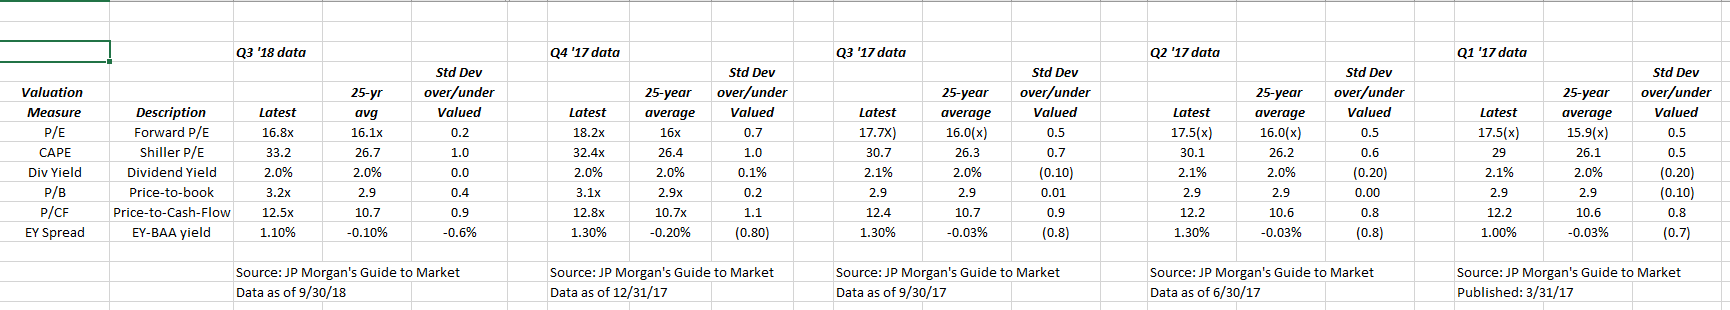 S&P 500 Valuation With Q3 '18 Data